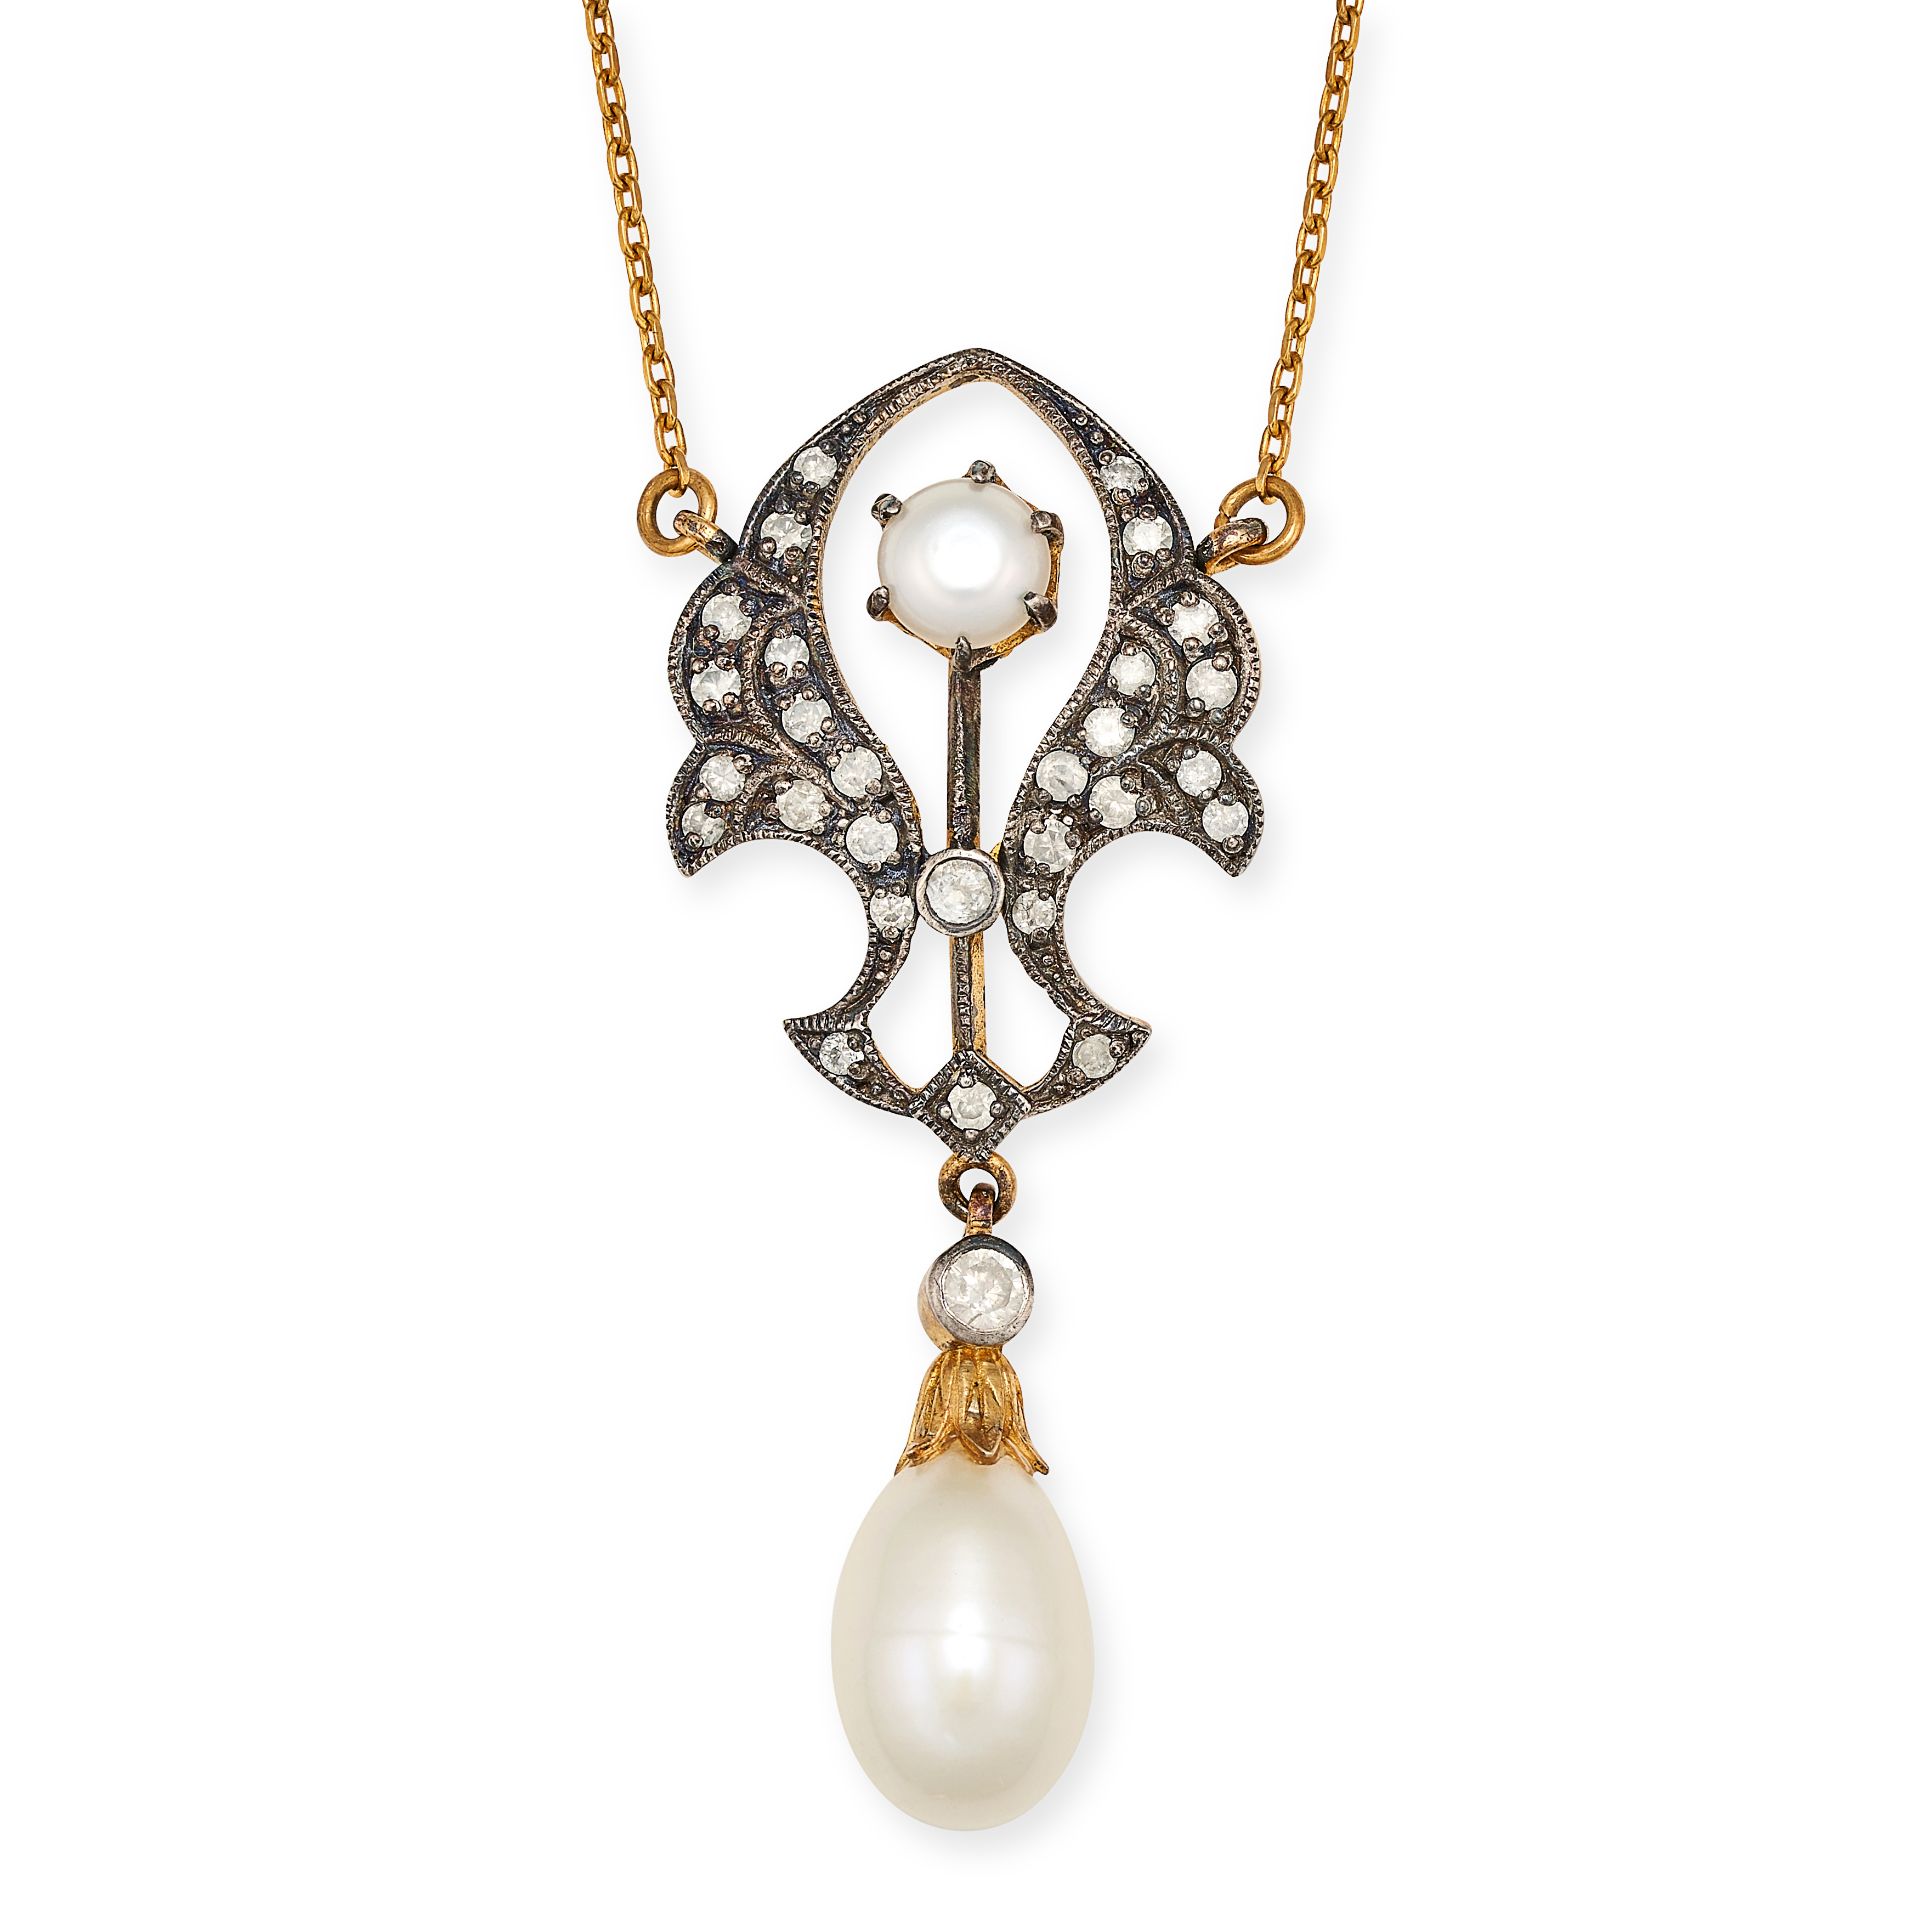 A PEARL AND DIAMOND PENDANT NECKLACE in yellow gold and silver, the pendant in scrolling design s...